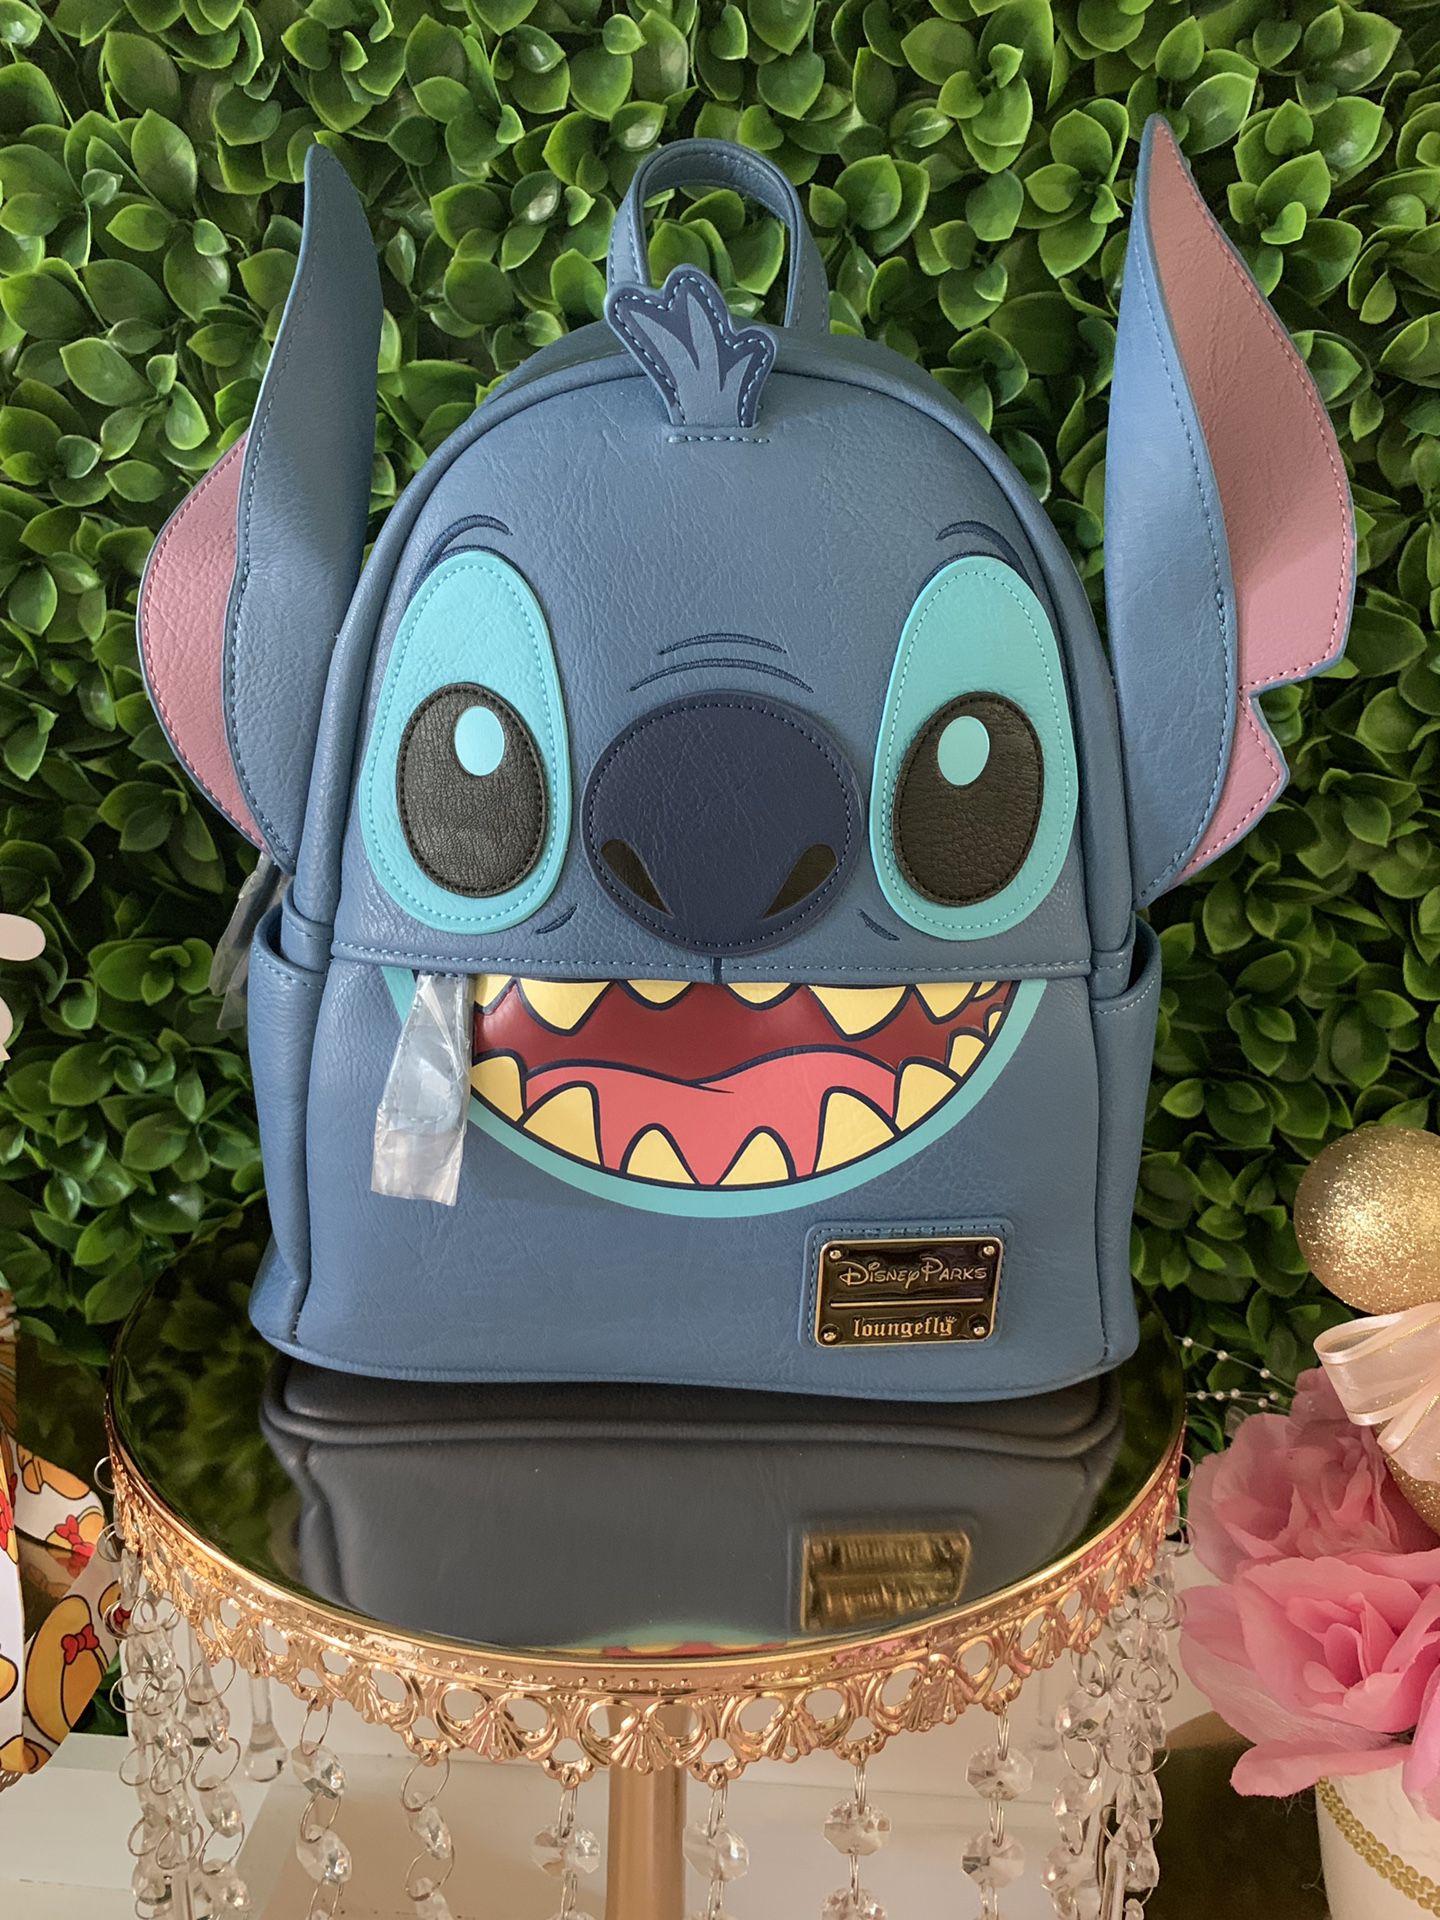 Stitch faux leather Mini by loungefly Disney Disneyland in Carson, CA - OfferUp